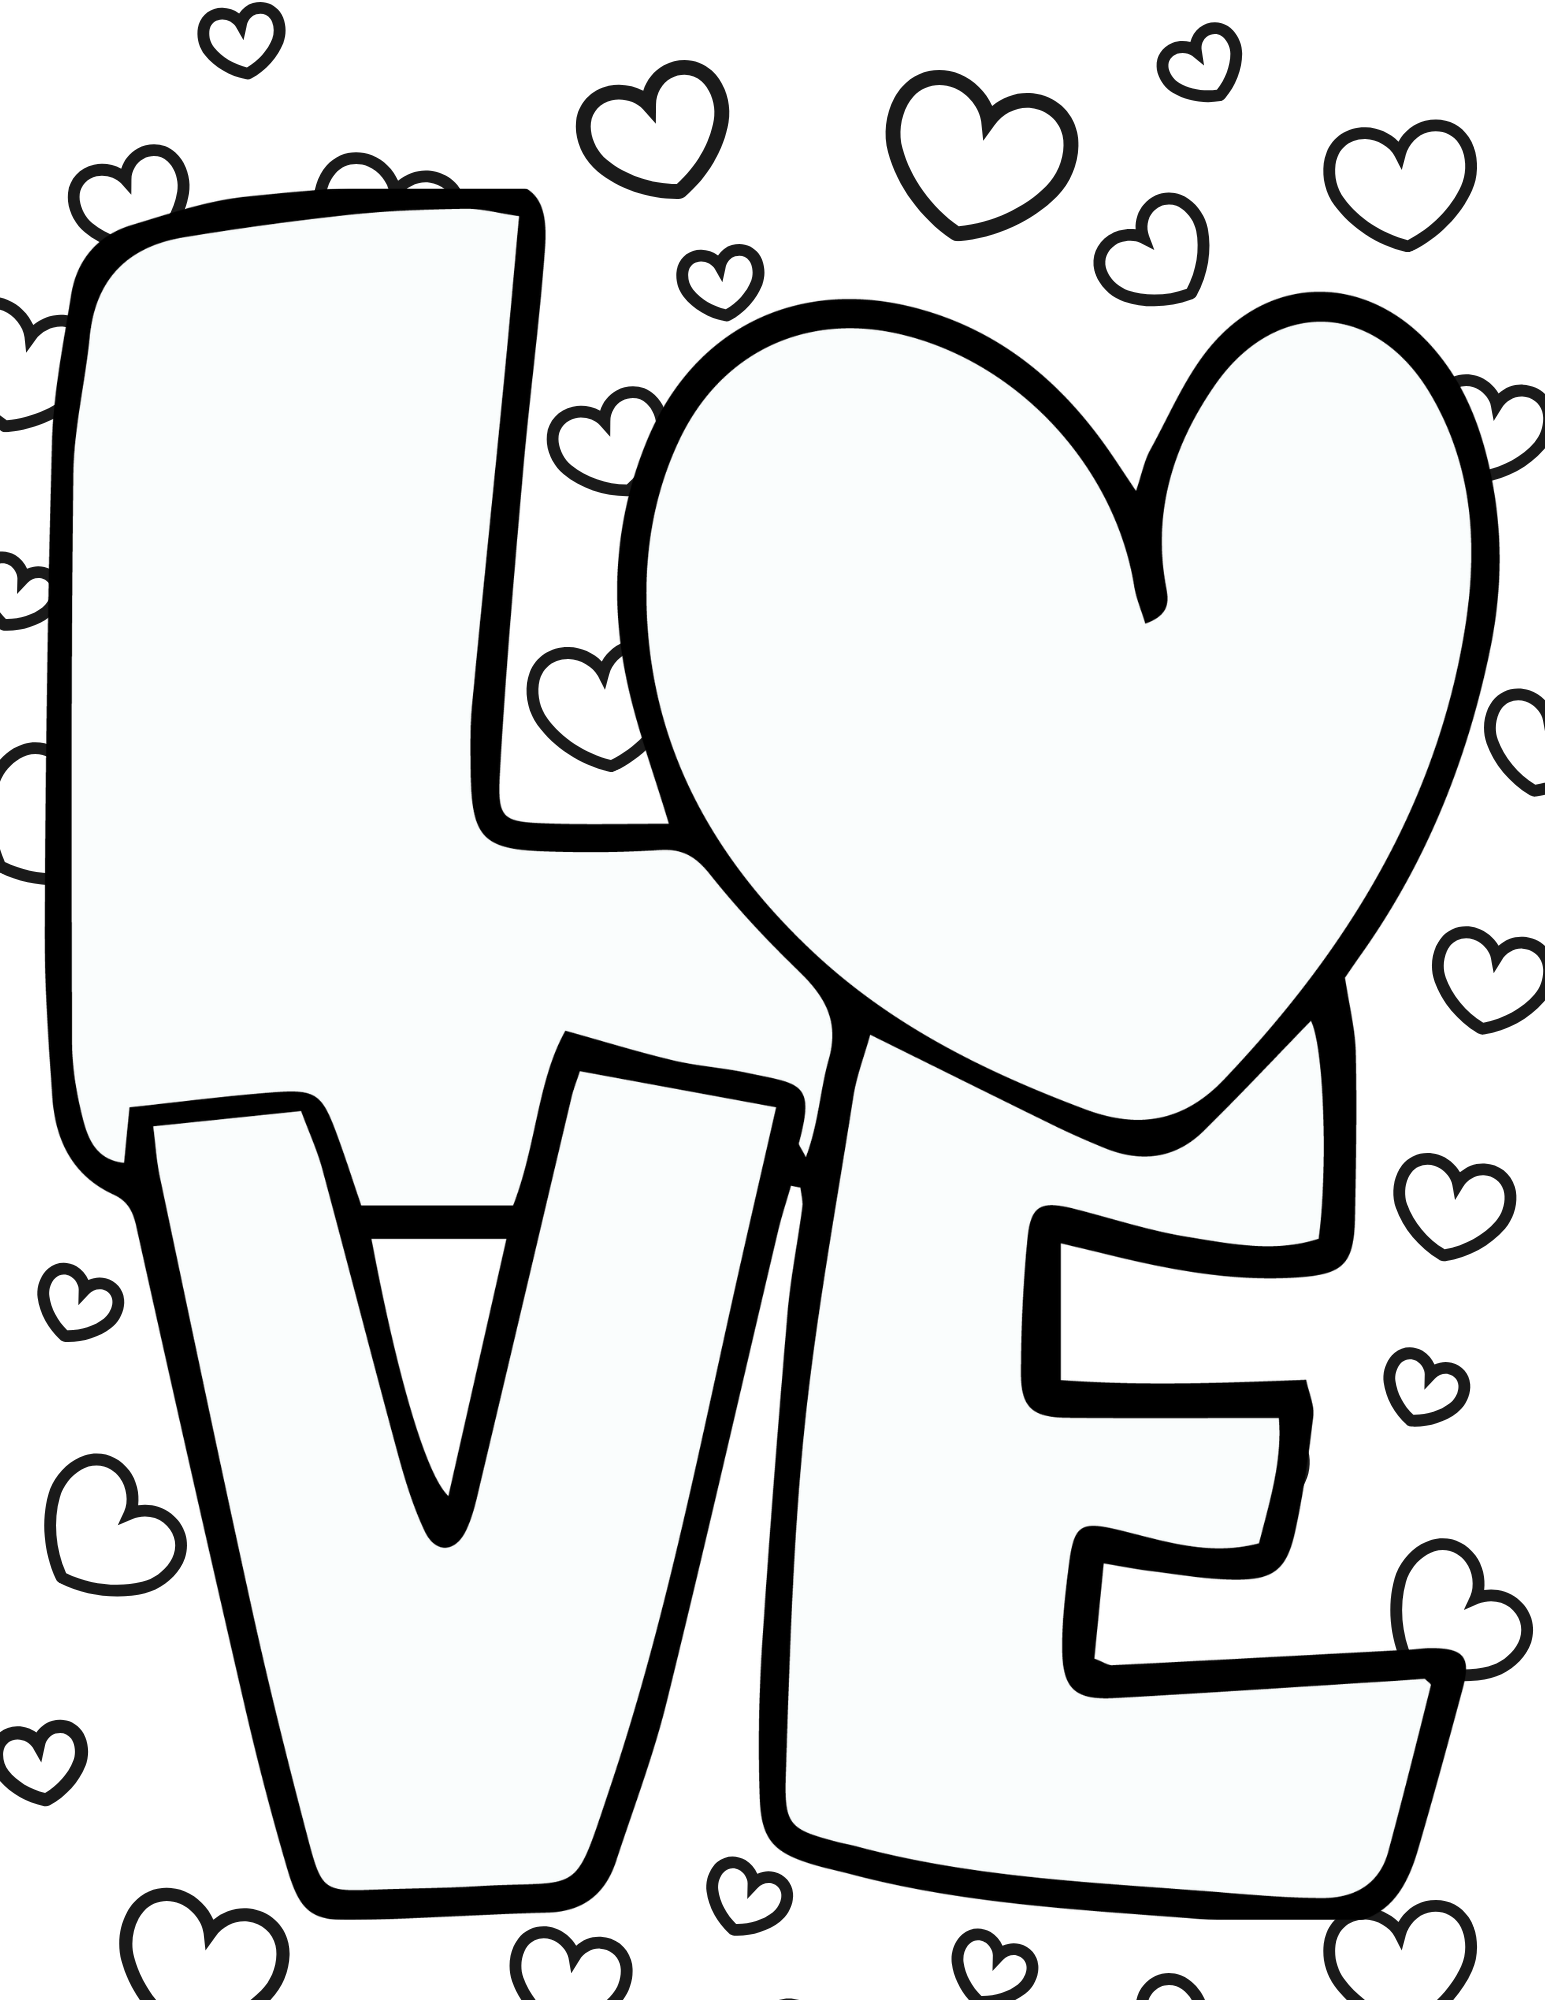 6 Free Printable Love Coloring Pages